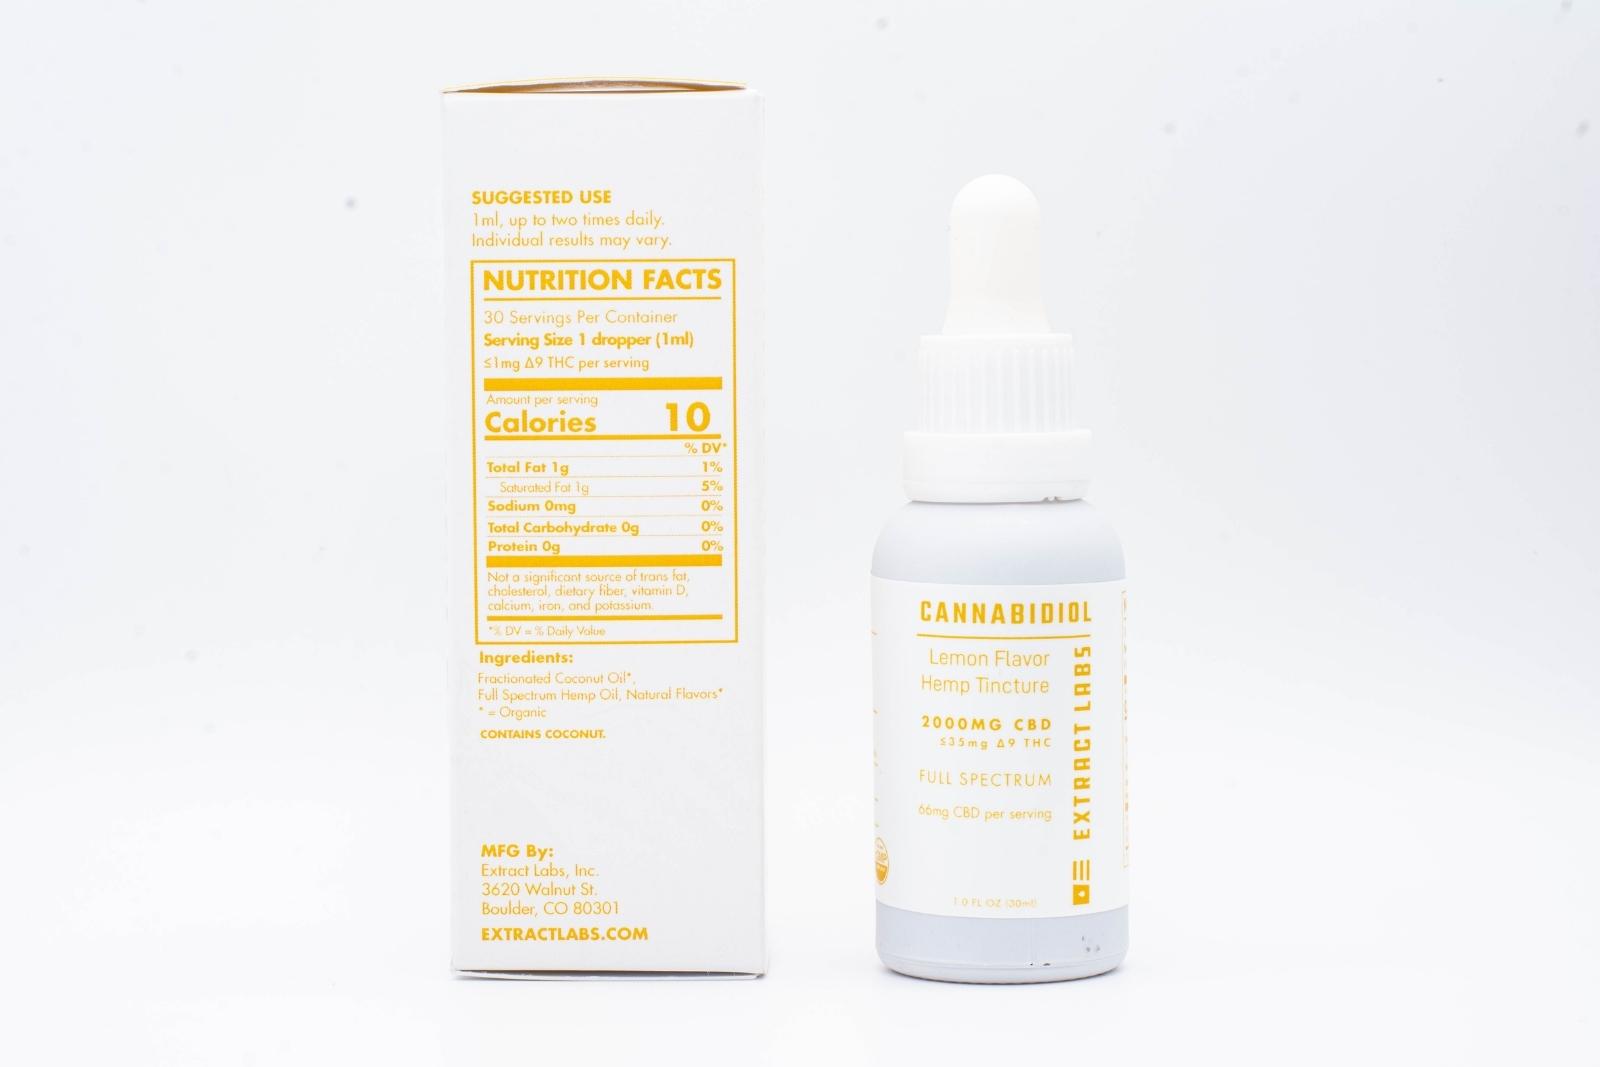 A tincture of Extract Labs Extra Strength Lemon Hemp Extract, next to its packaging, on a white background